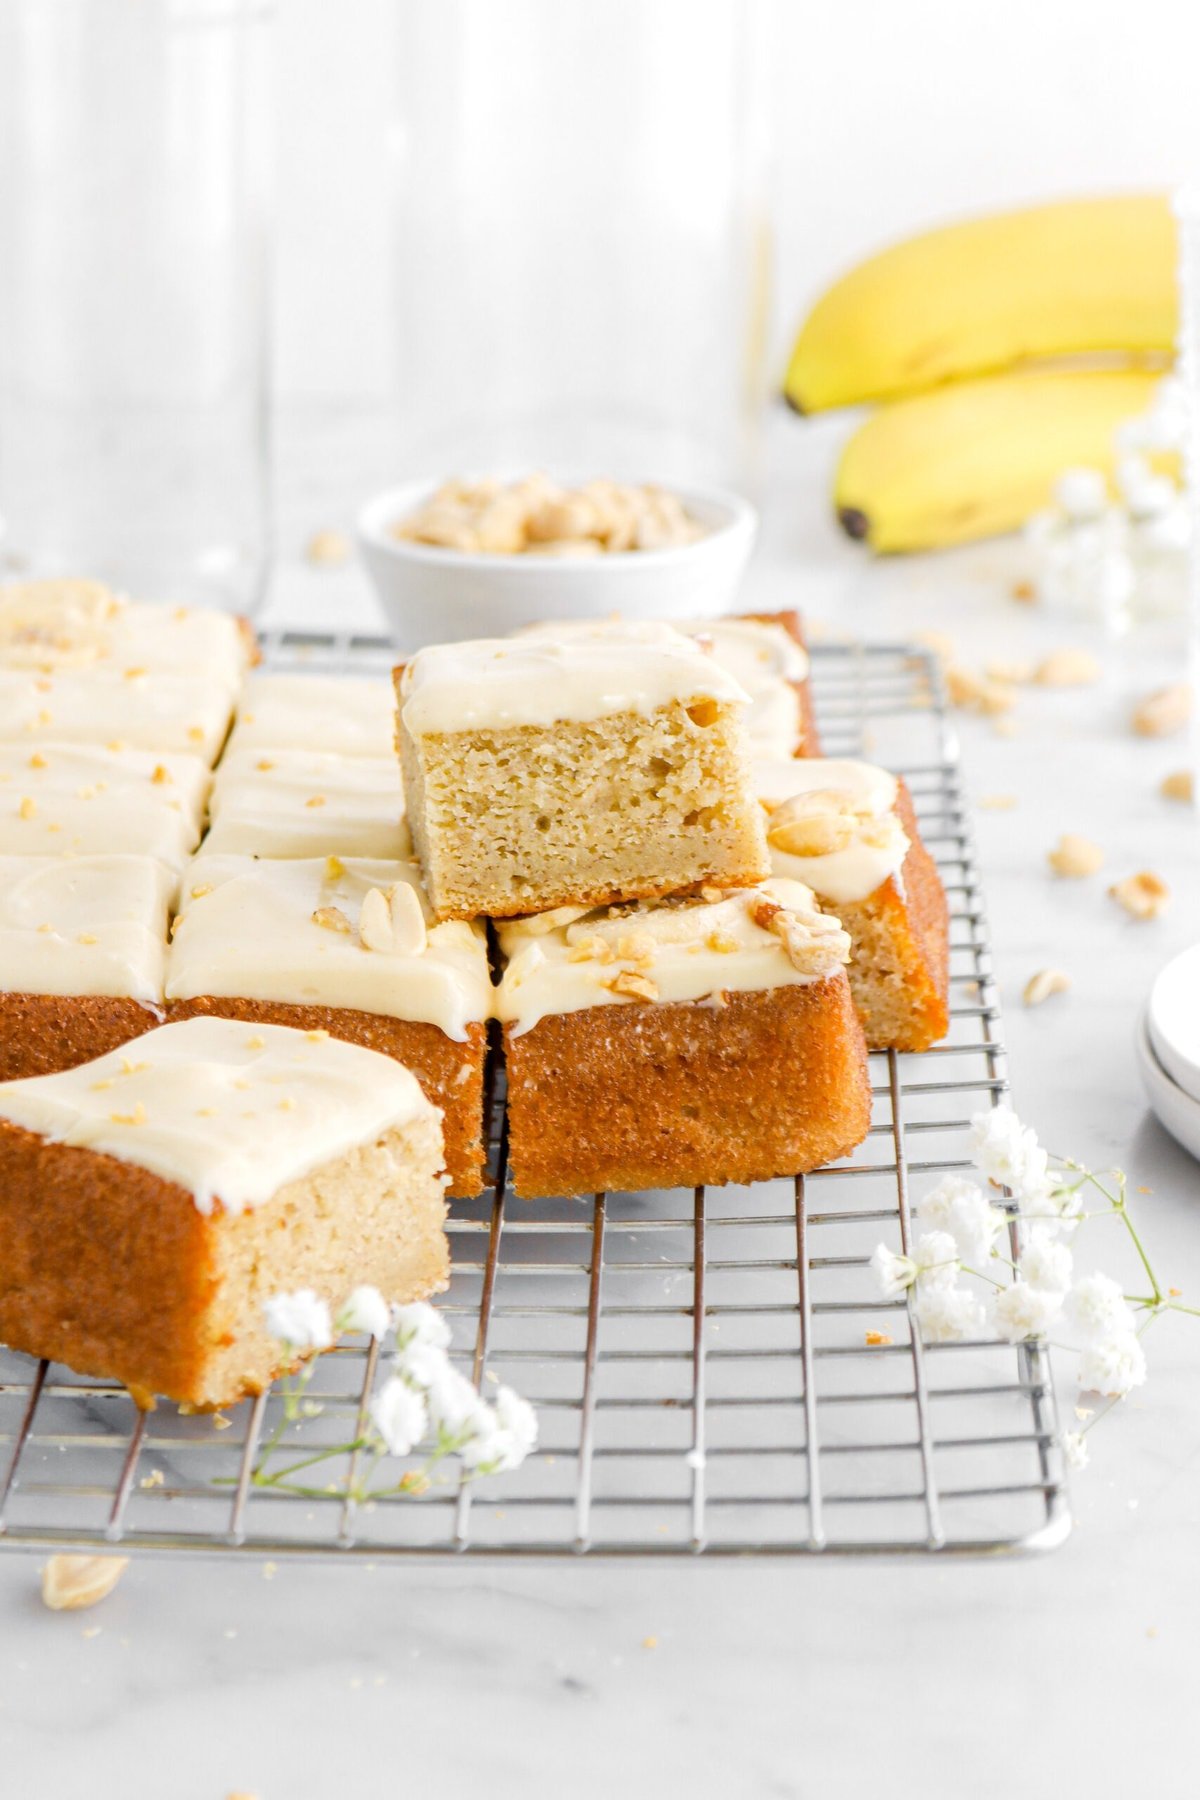 slice of banana cake stacked on top of cut cake on a wire cooling rack with white flowers in front, a bowl of peanuts and bananas behind.